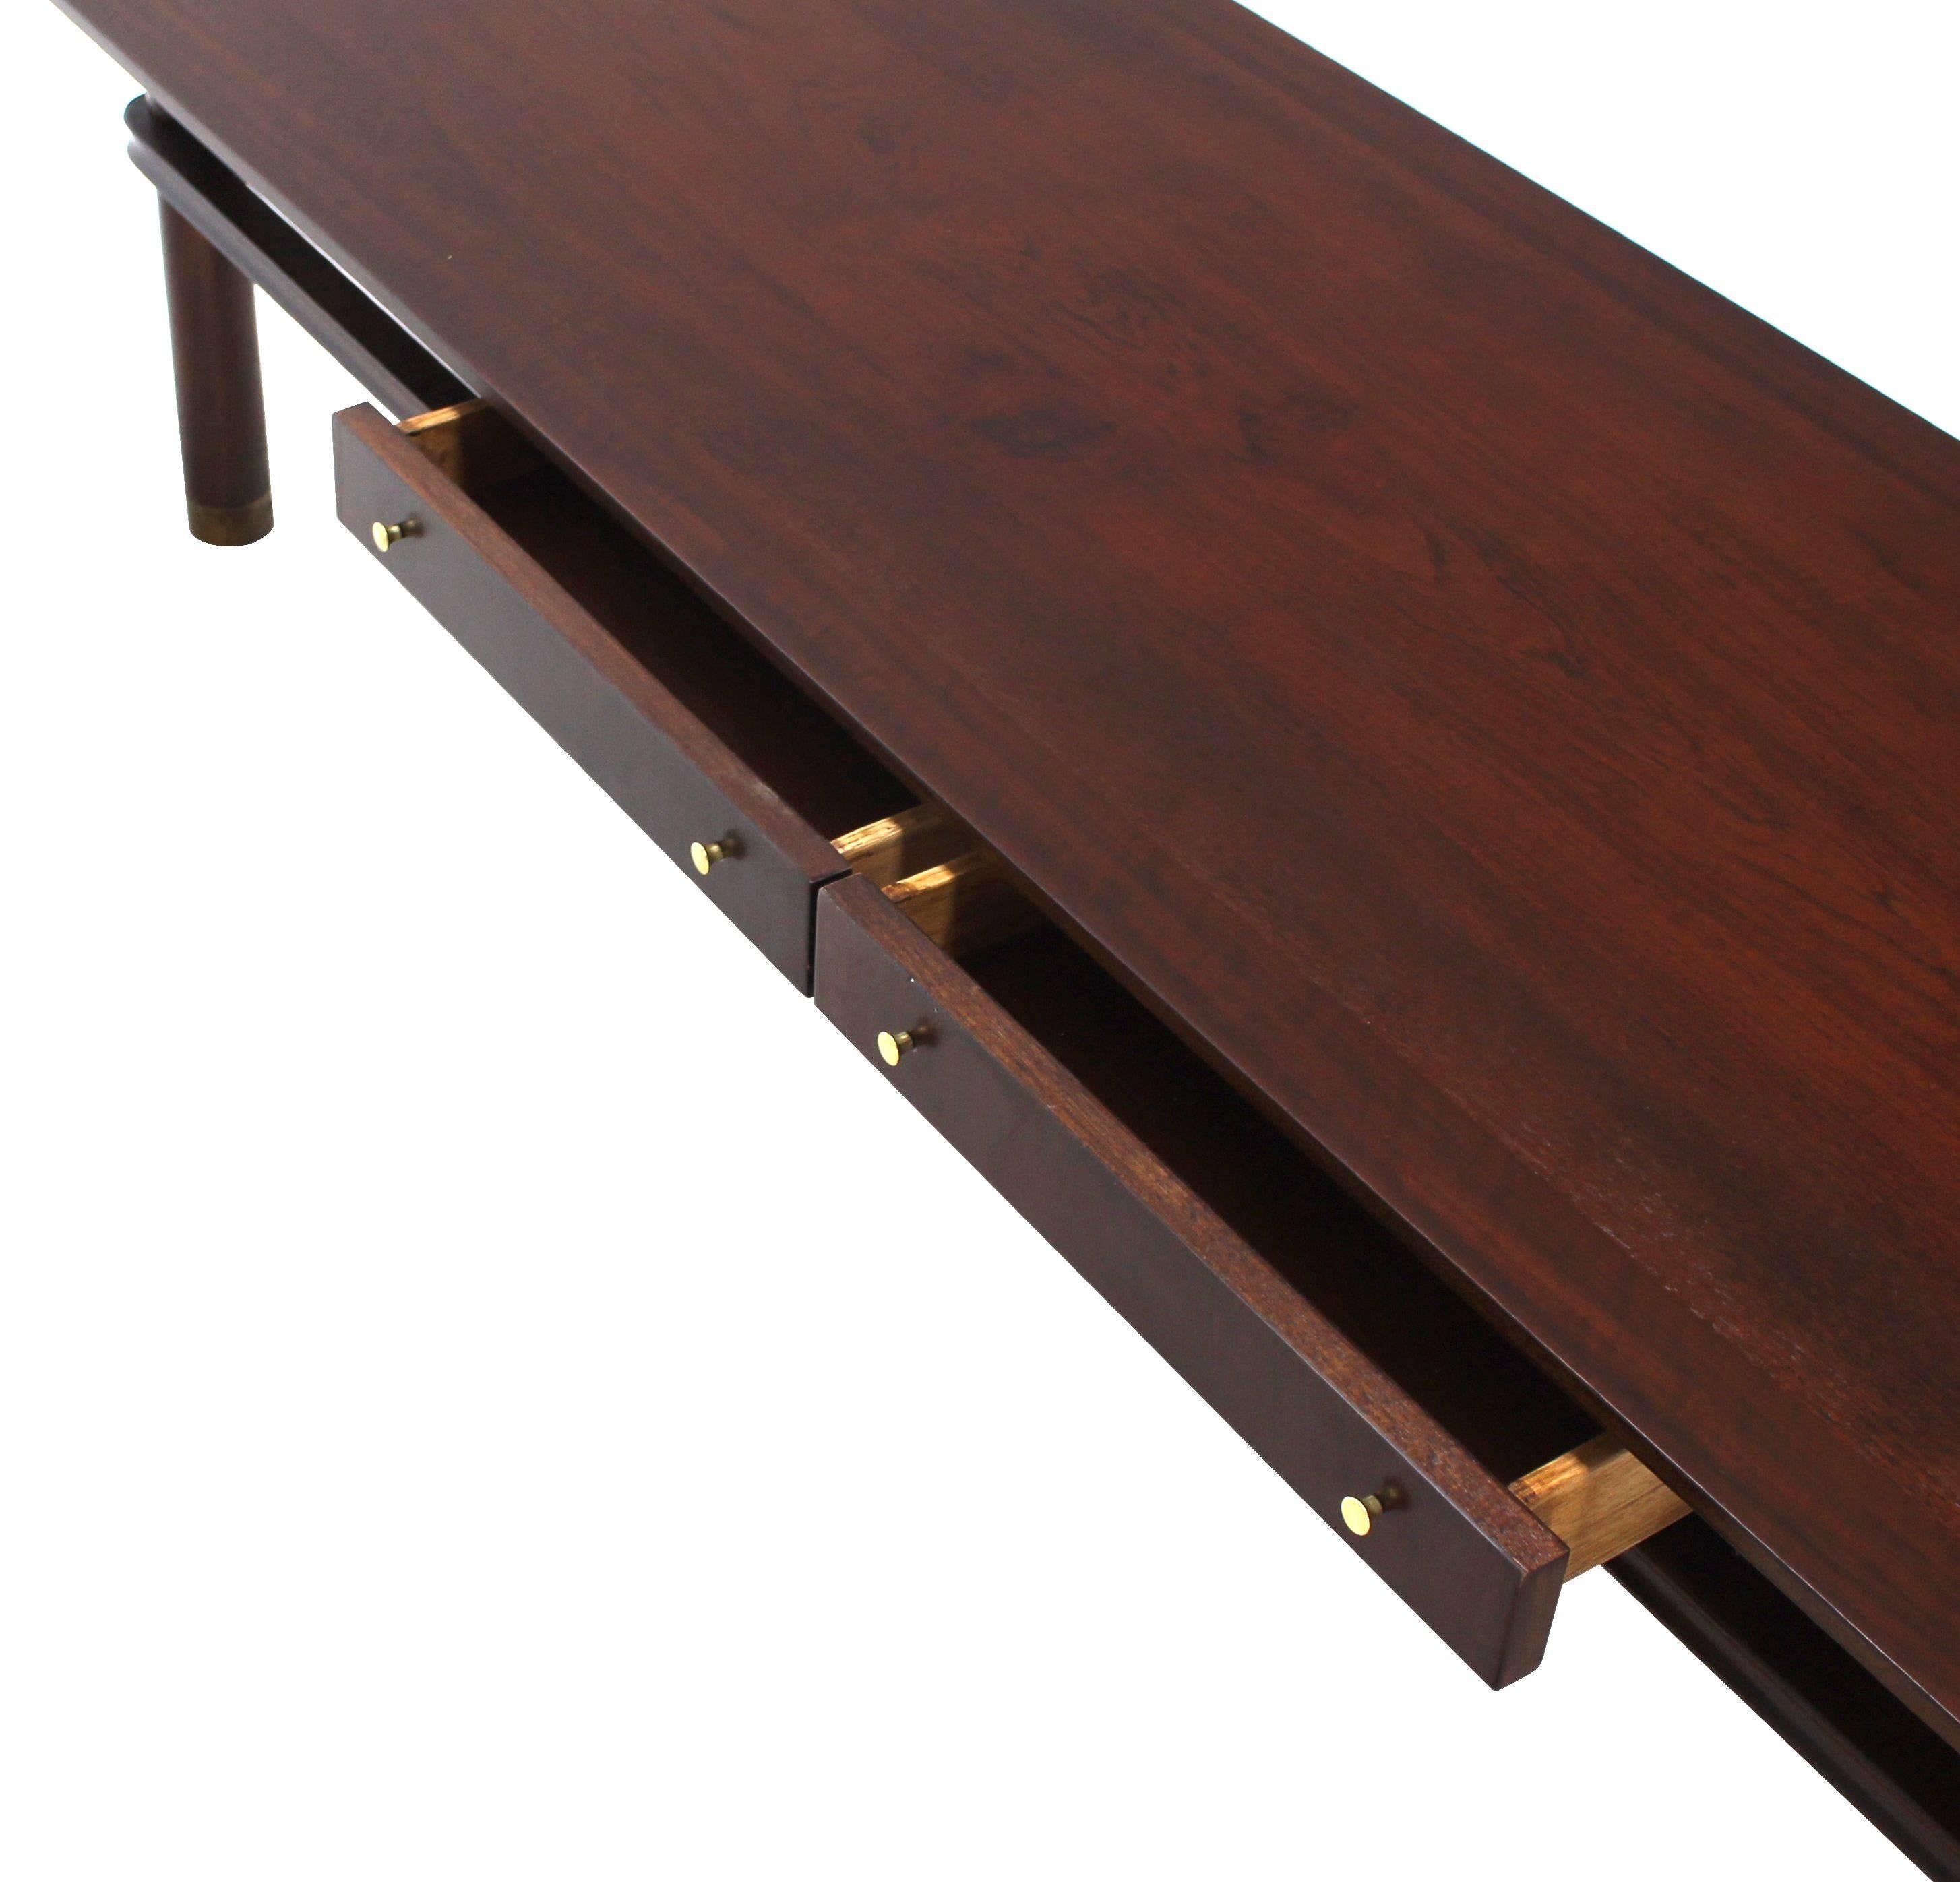 Long Mid Century Modern Walnut Coffee Table with Two Drawers In Excellent Condition For Sale In Rockaway, NJ